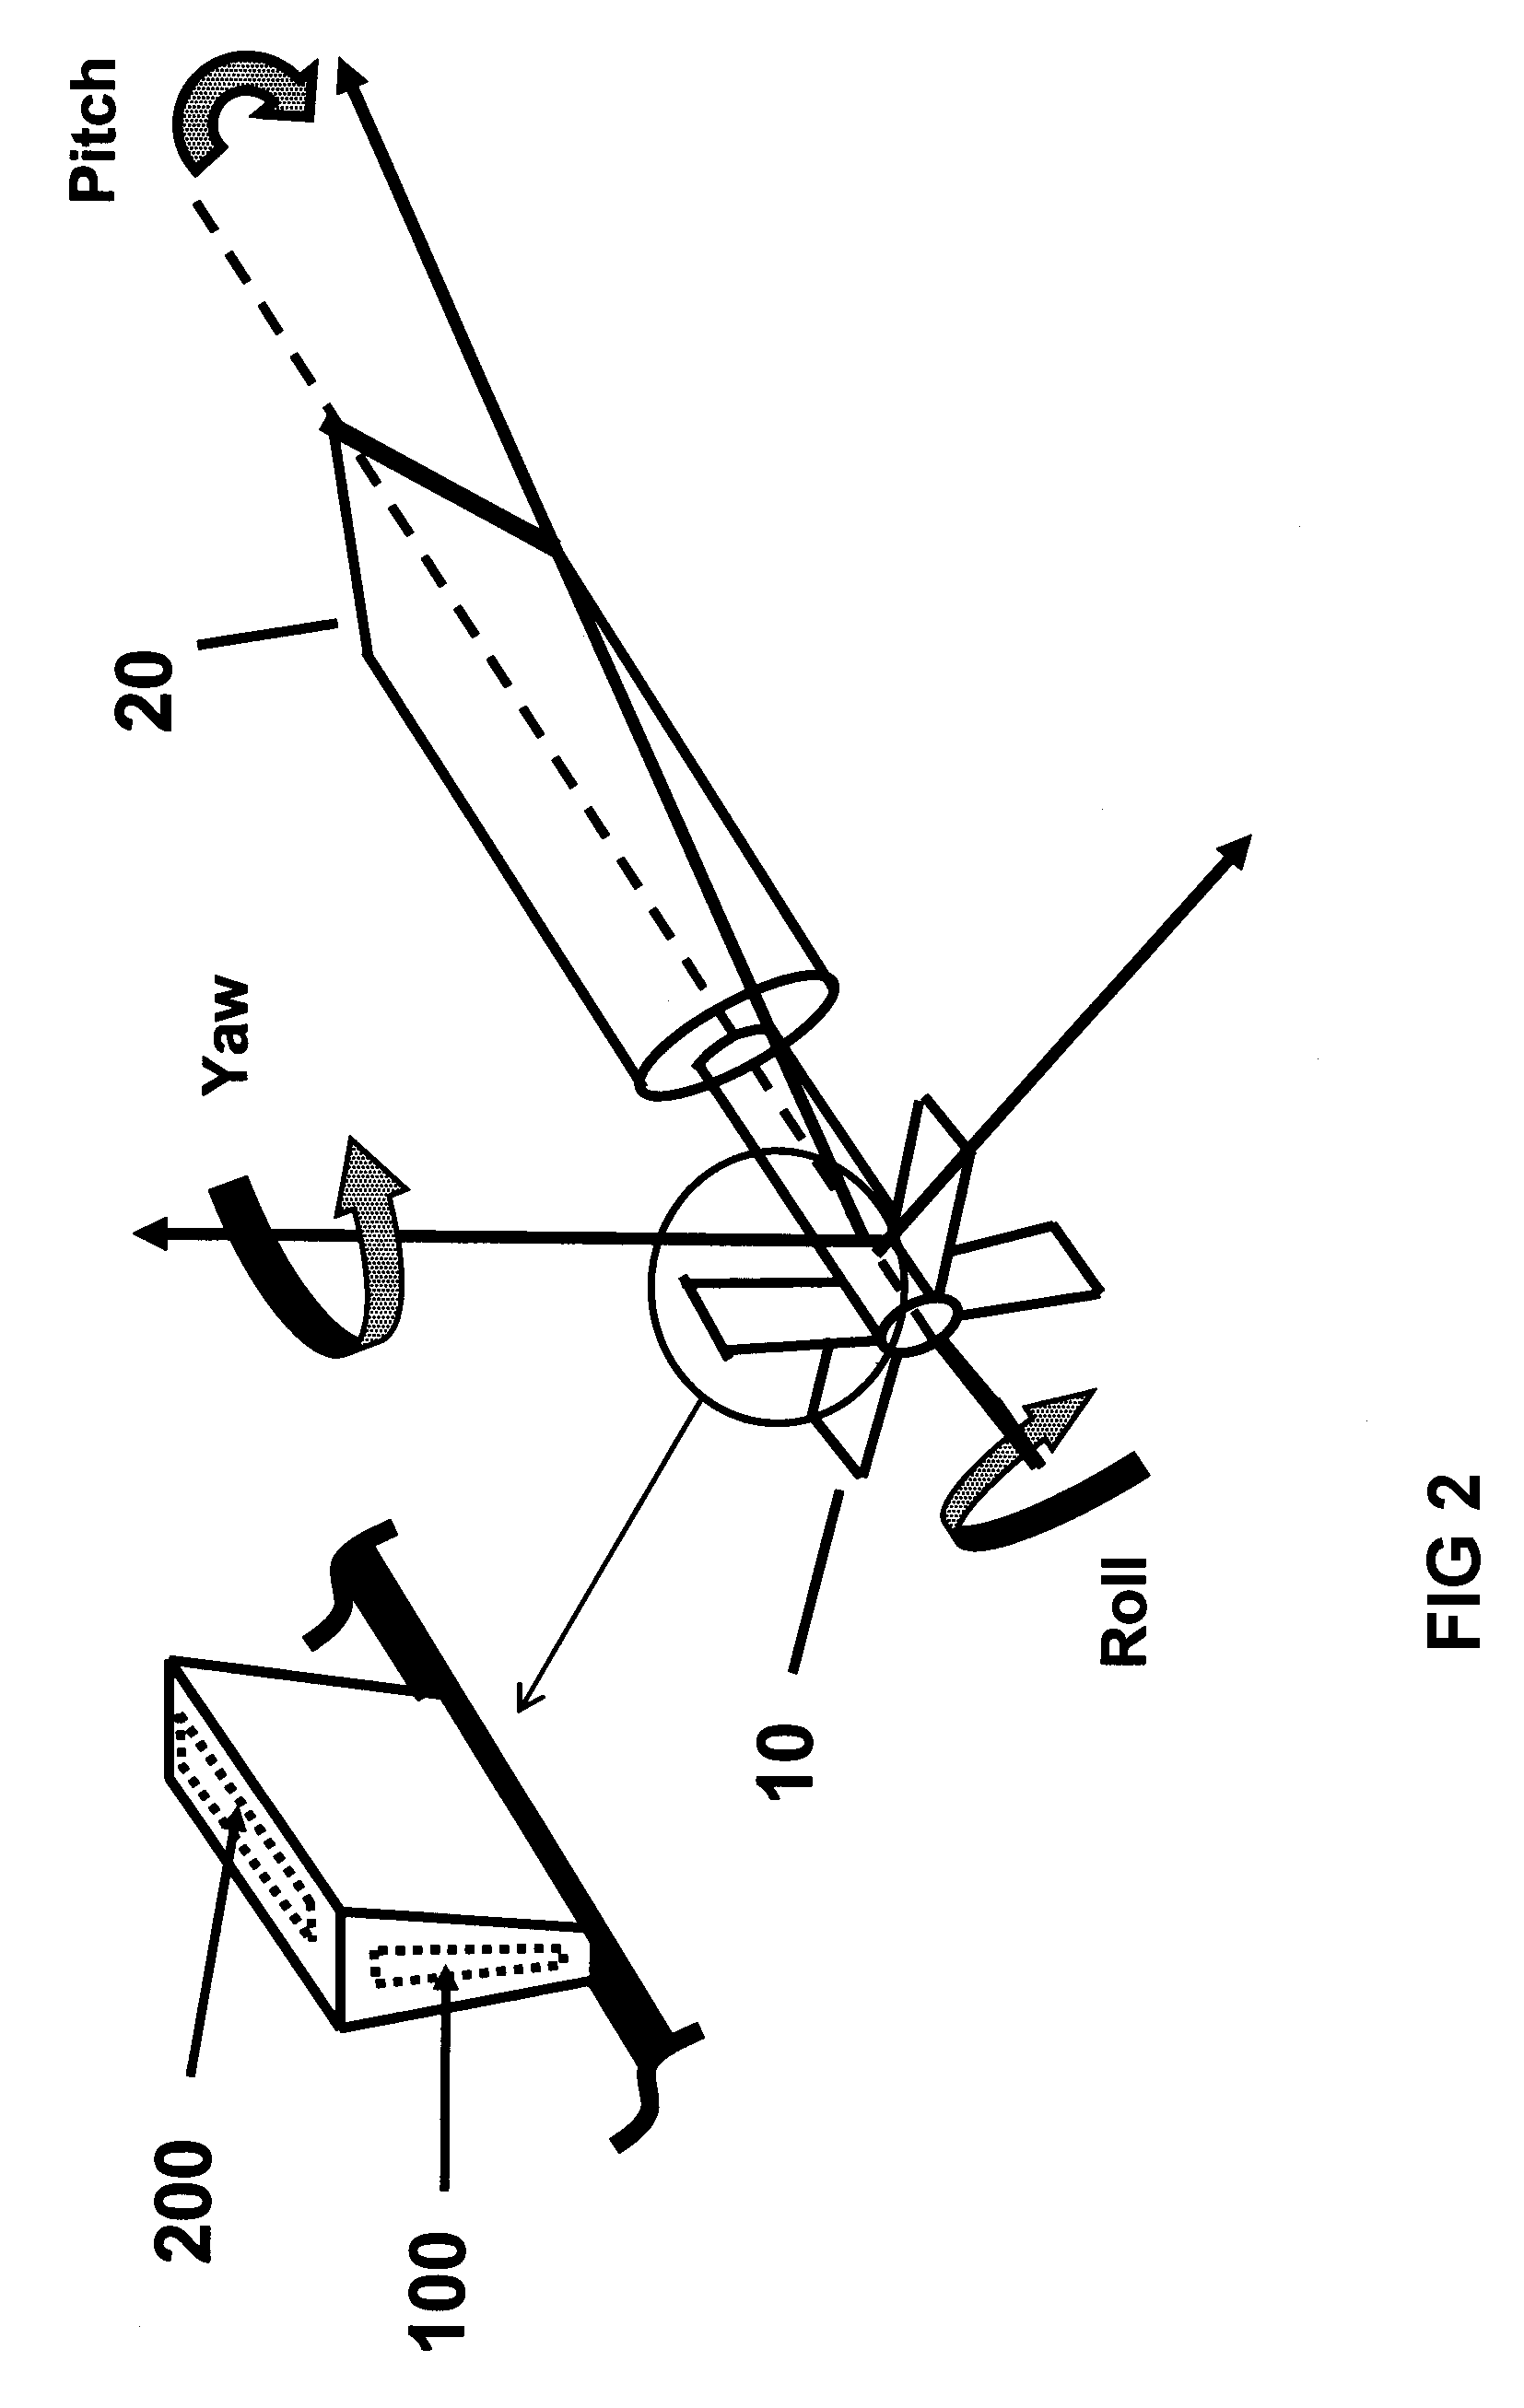 System and method for the measurement of full relative position and orientation of objects